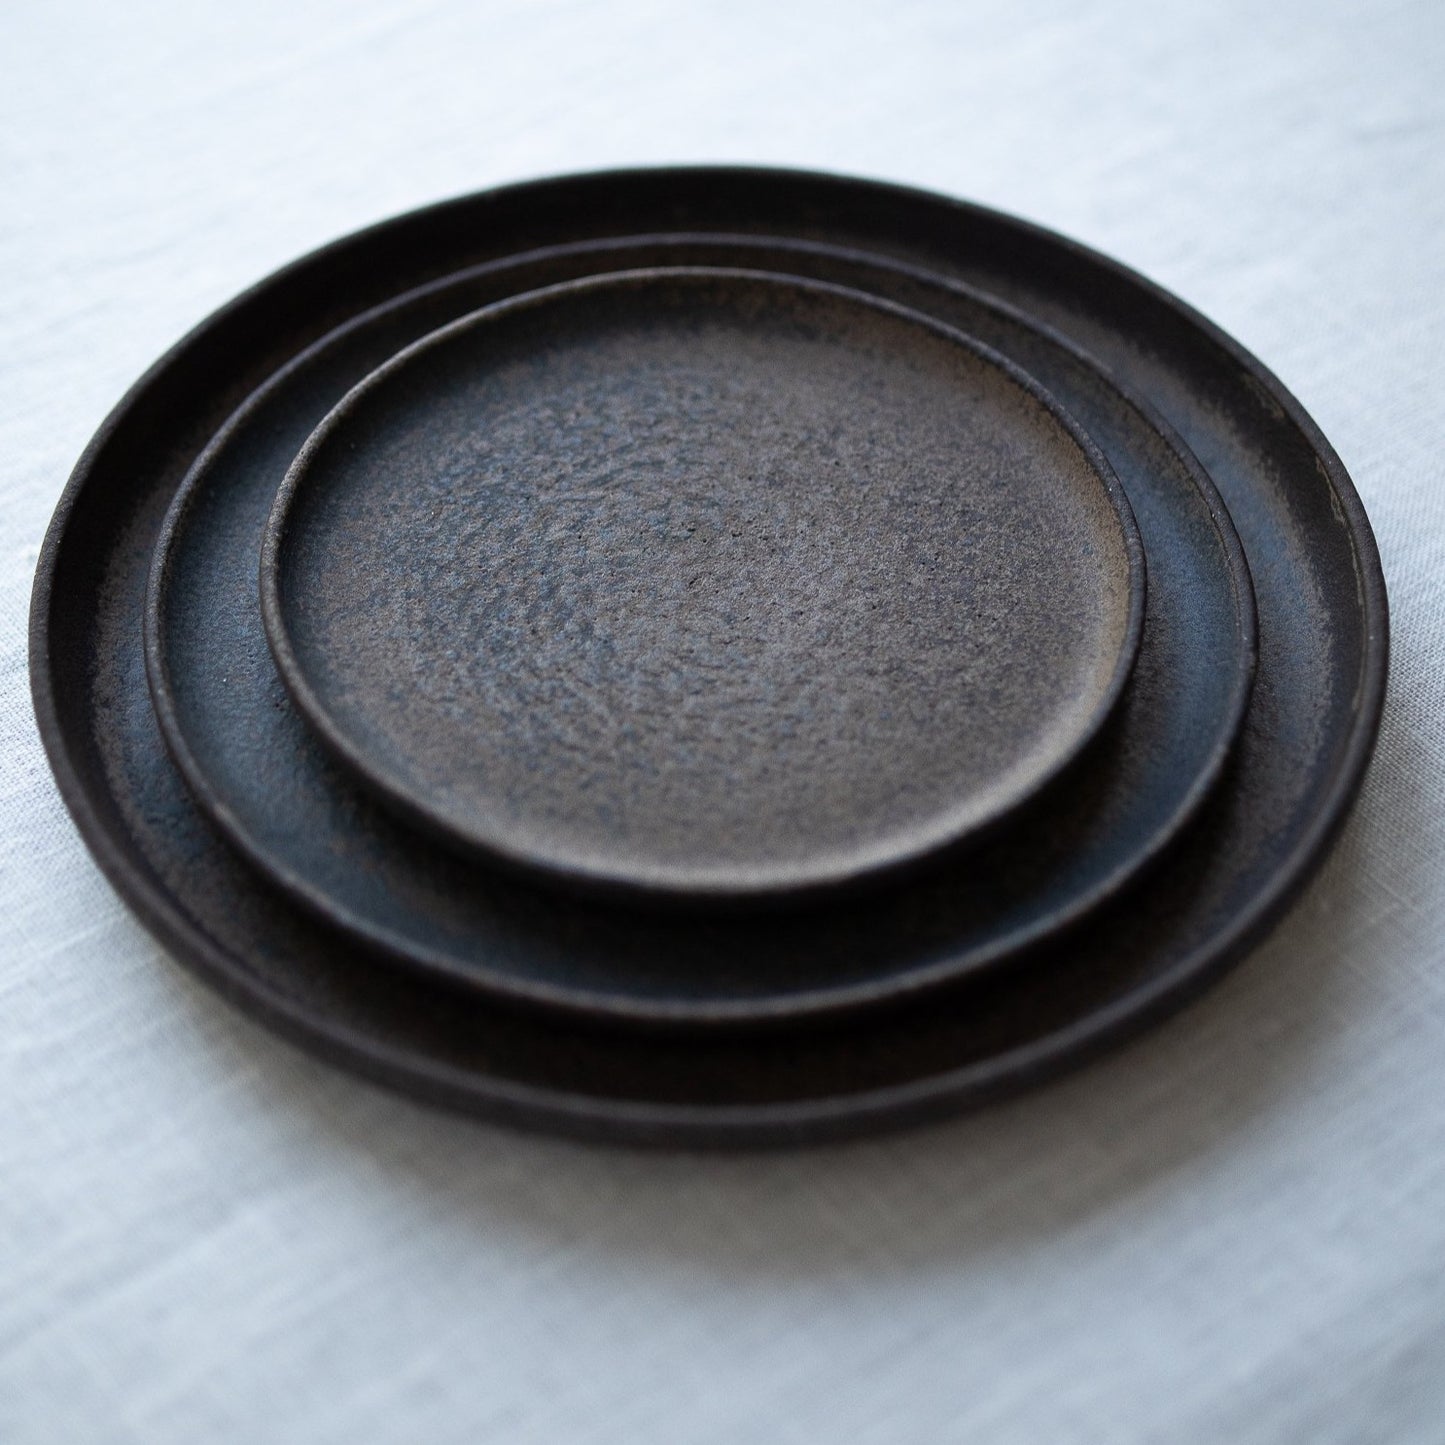 Plate in smokey brown